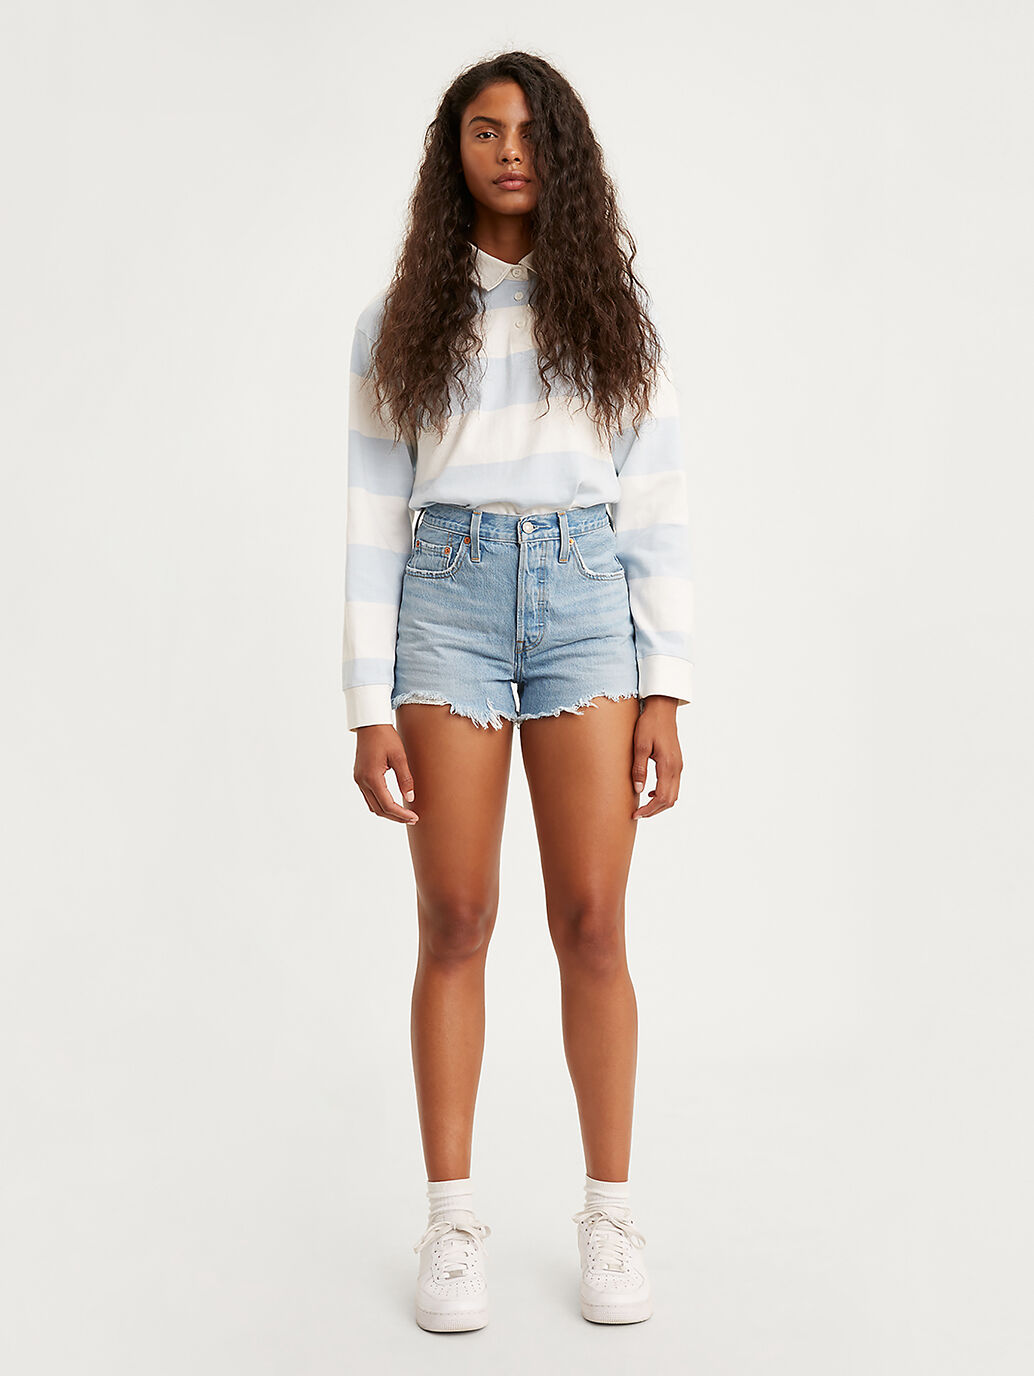 levi vintage shorts womens high waisted levis 501